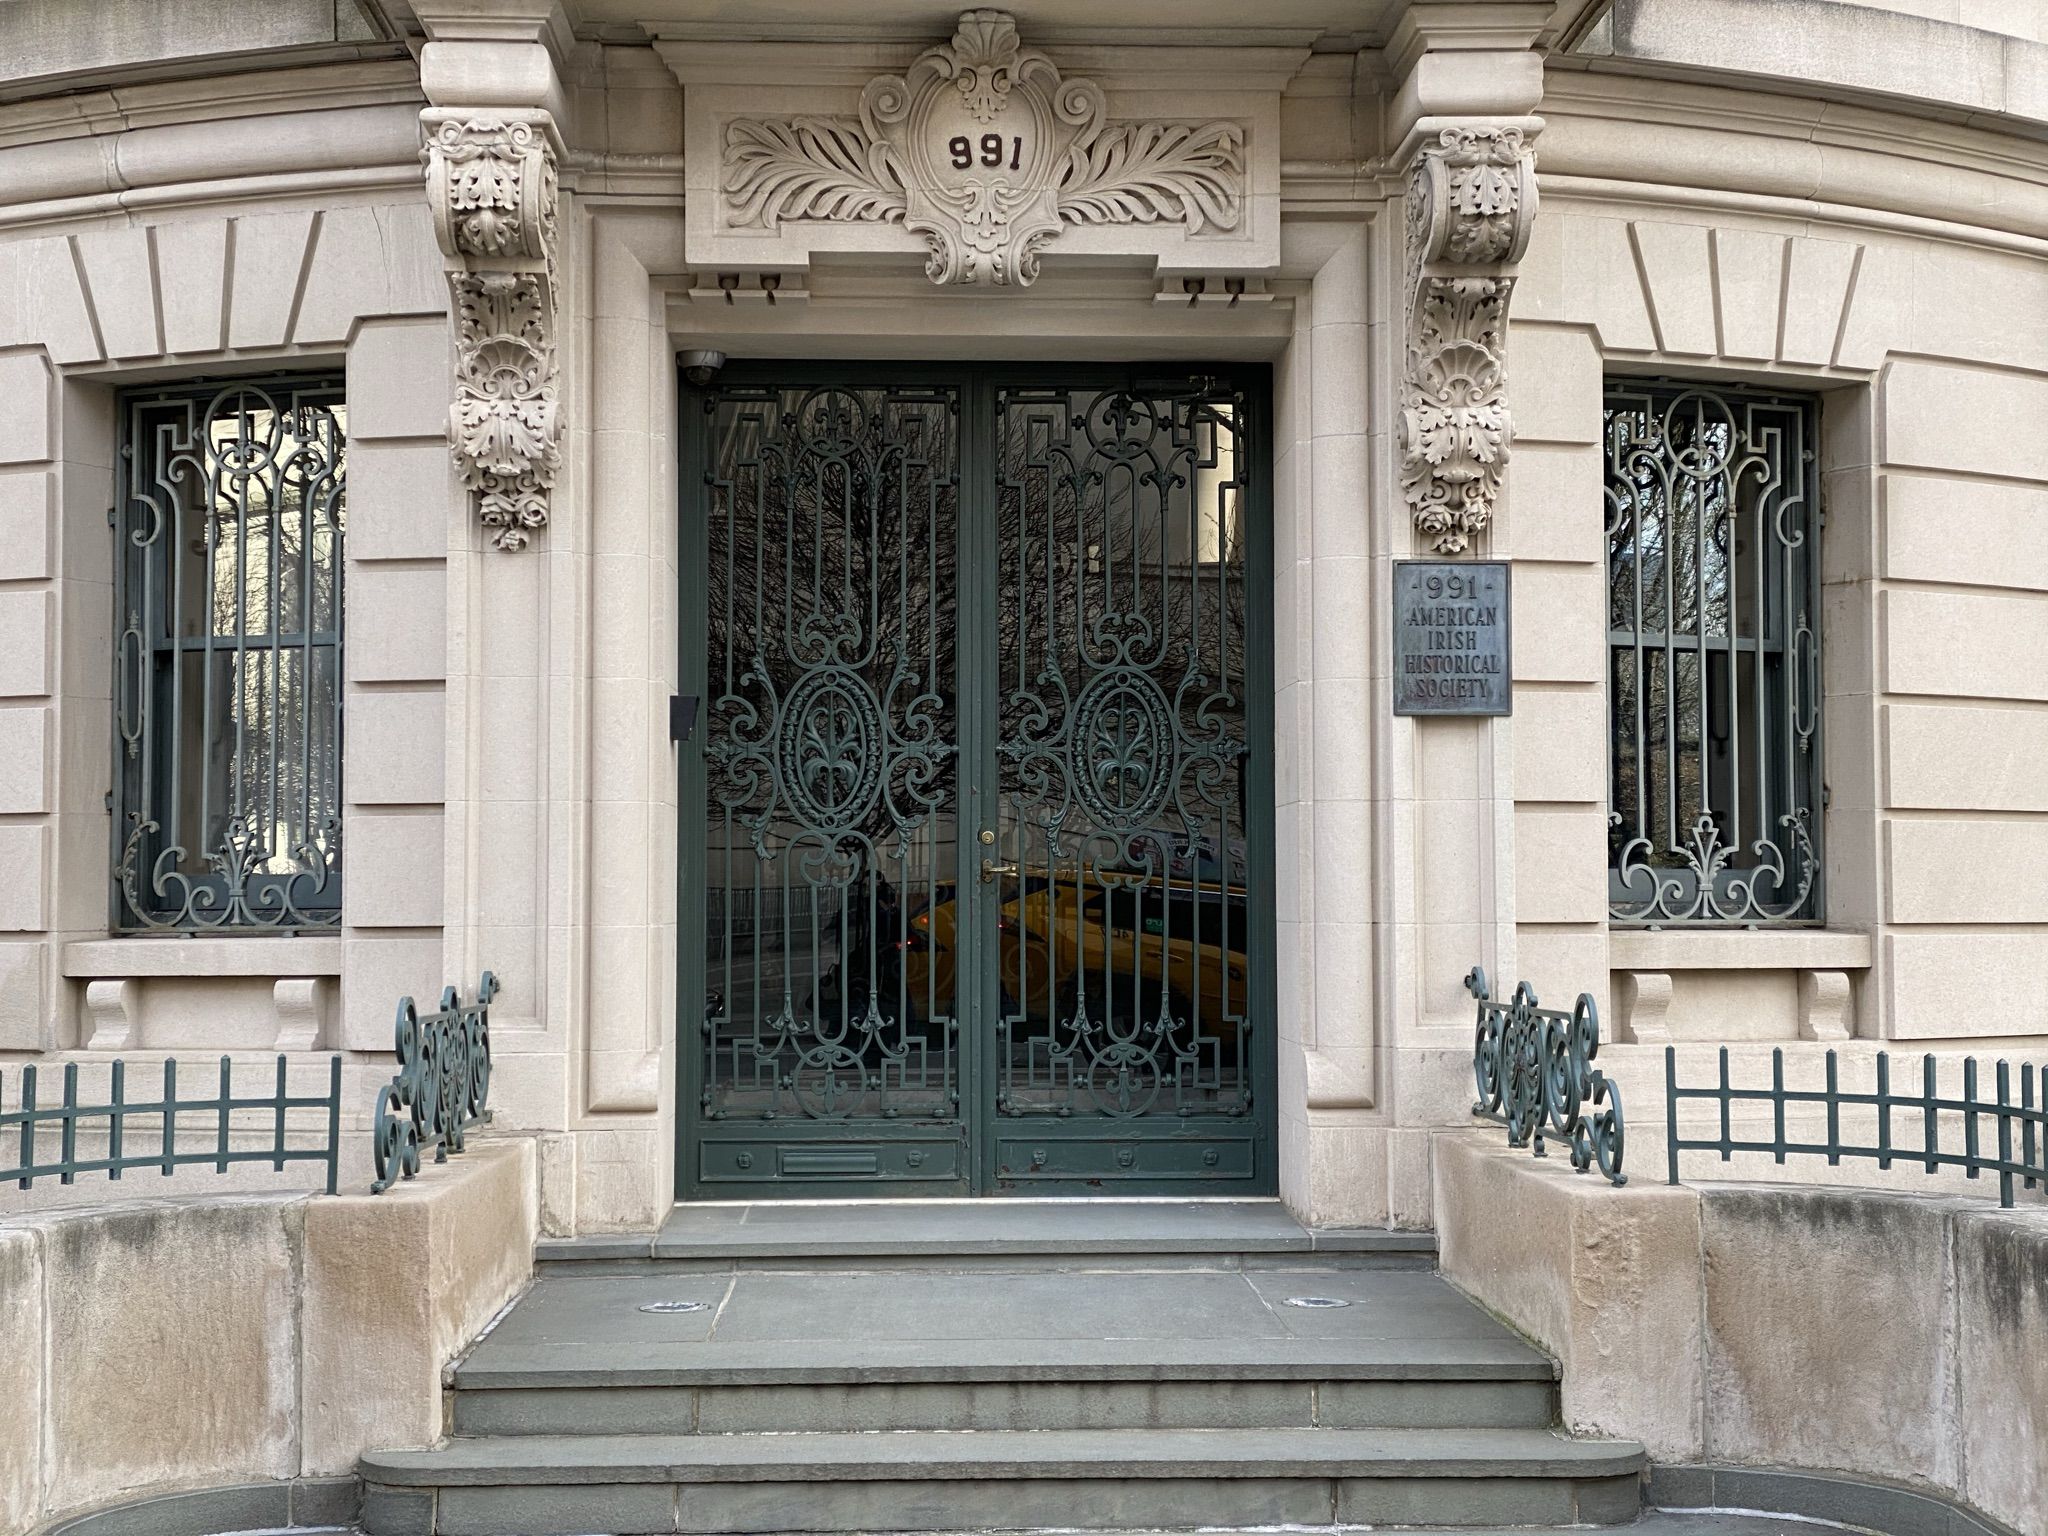 This Fifth Avenue Home is One of the Last Gilded Age Mansions in